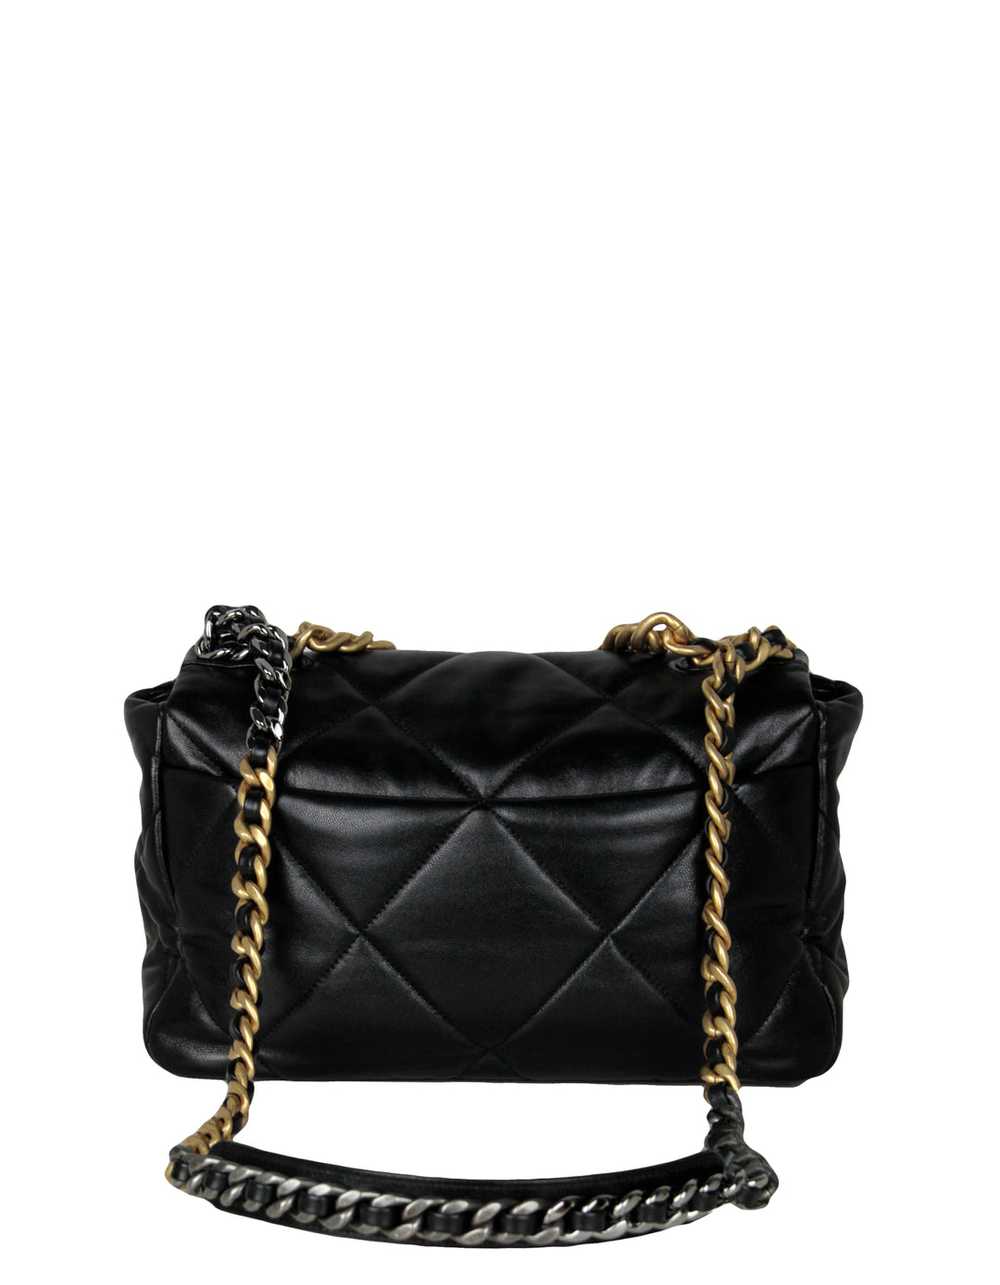 Chanel Black Lambskin Leather Quilted Large 19 Bag - image 3